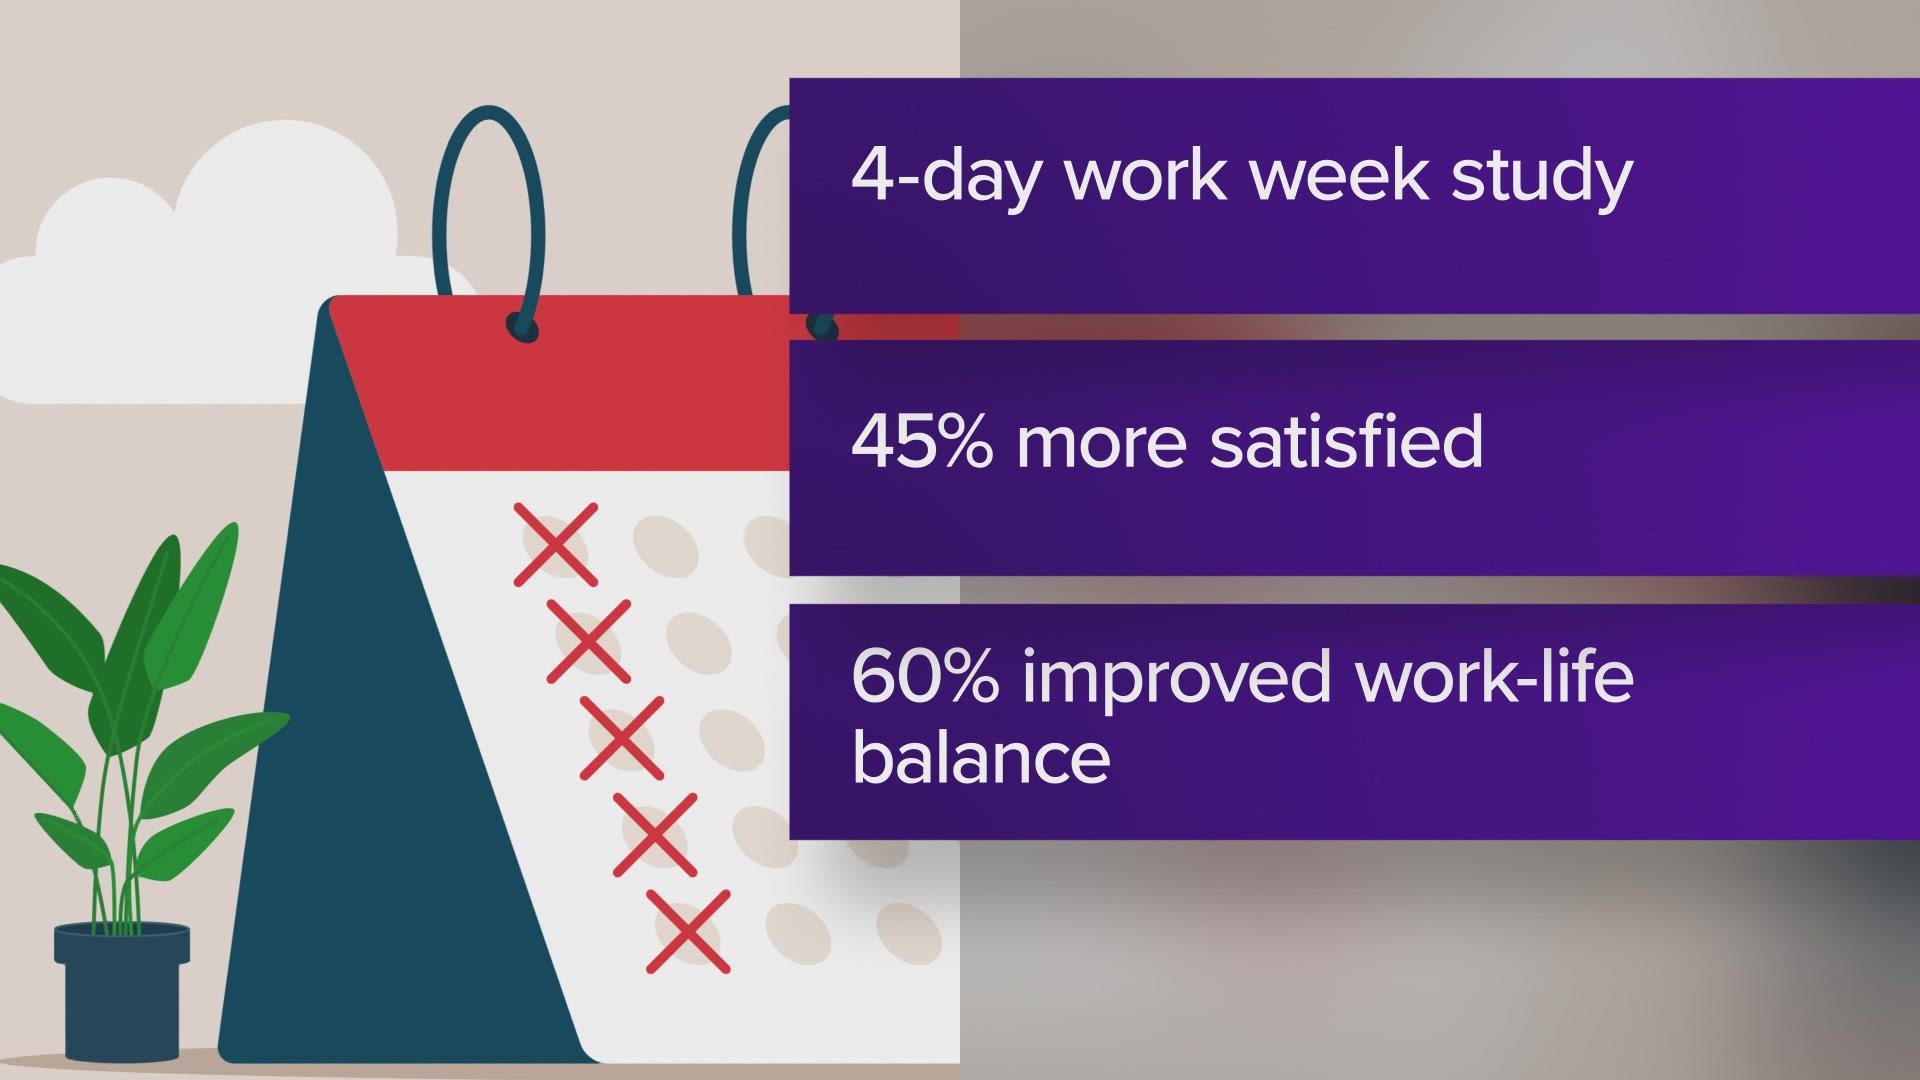 More than 60% of those surveyed said a 4-day work week improved work-life balance.